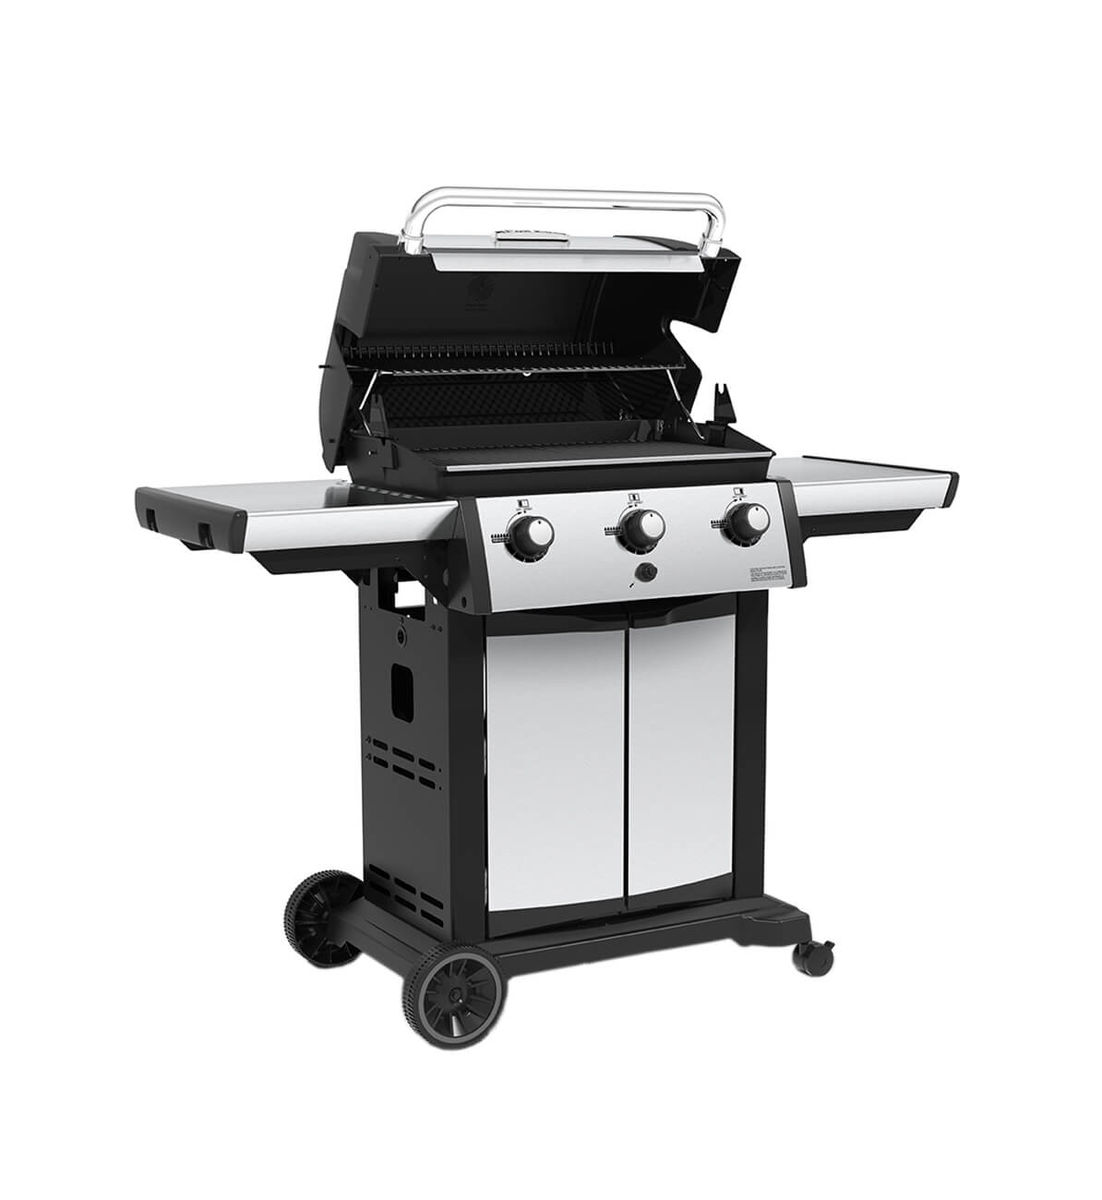 Image of Broil King Signet 320 Grill bei nettoshop.ch